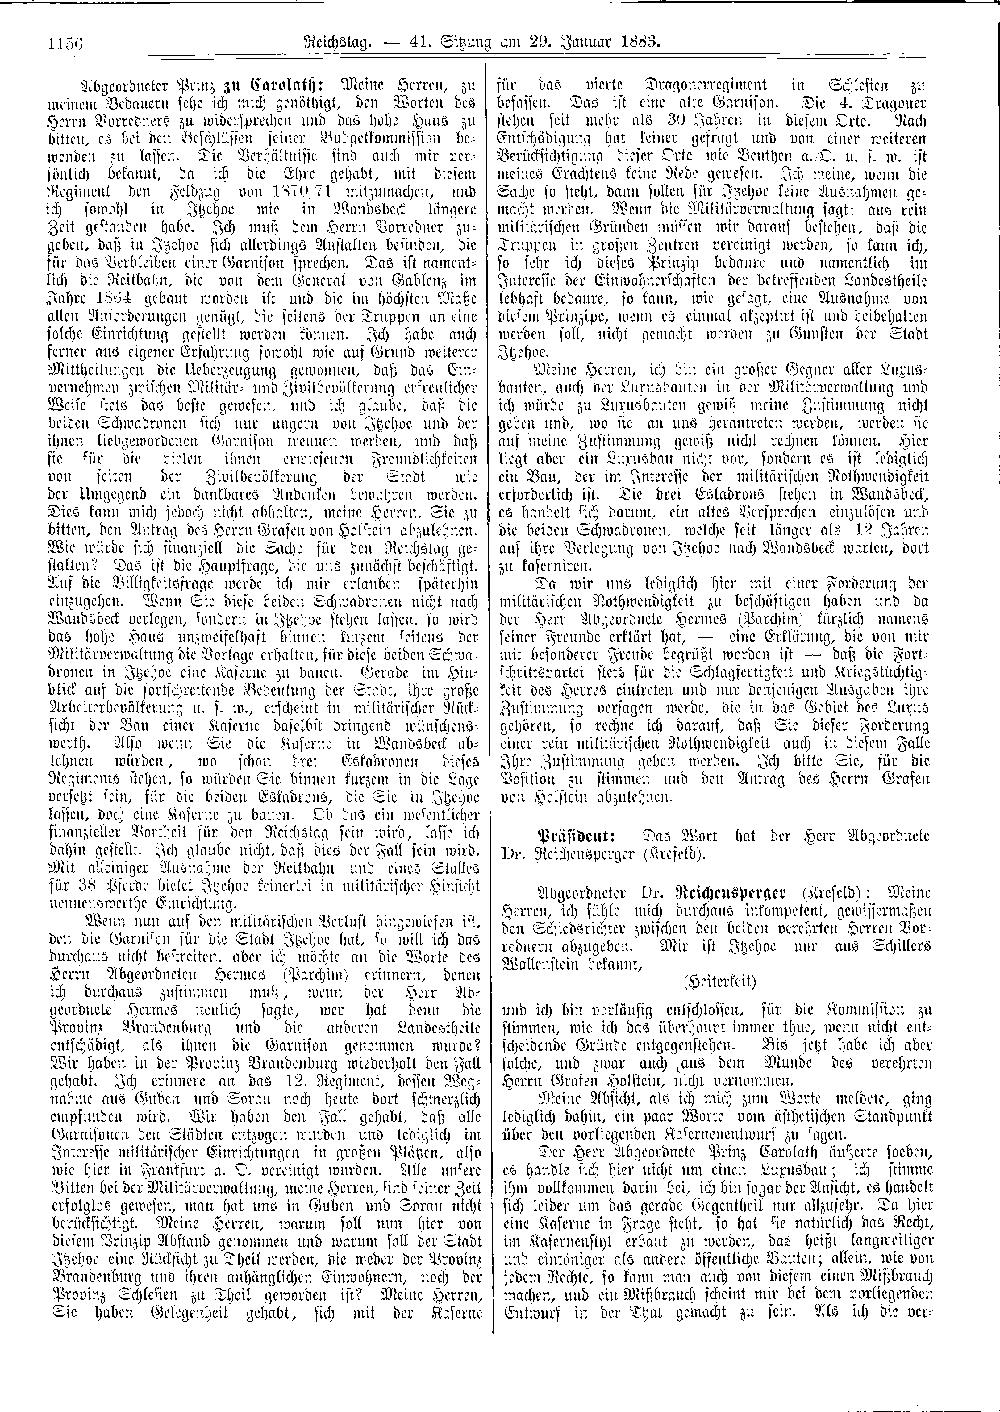 Scan of page 1156